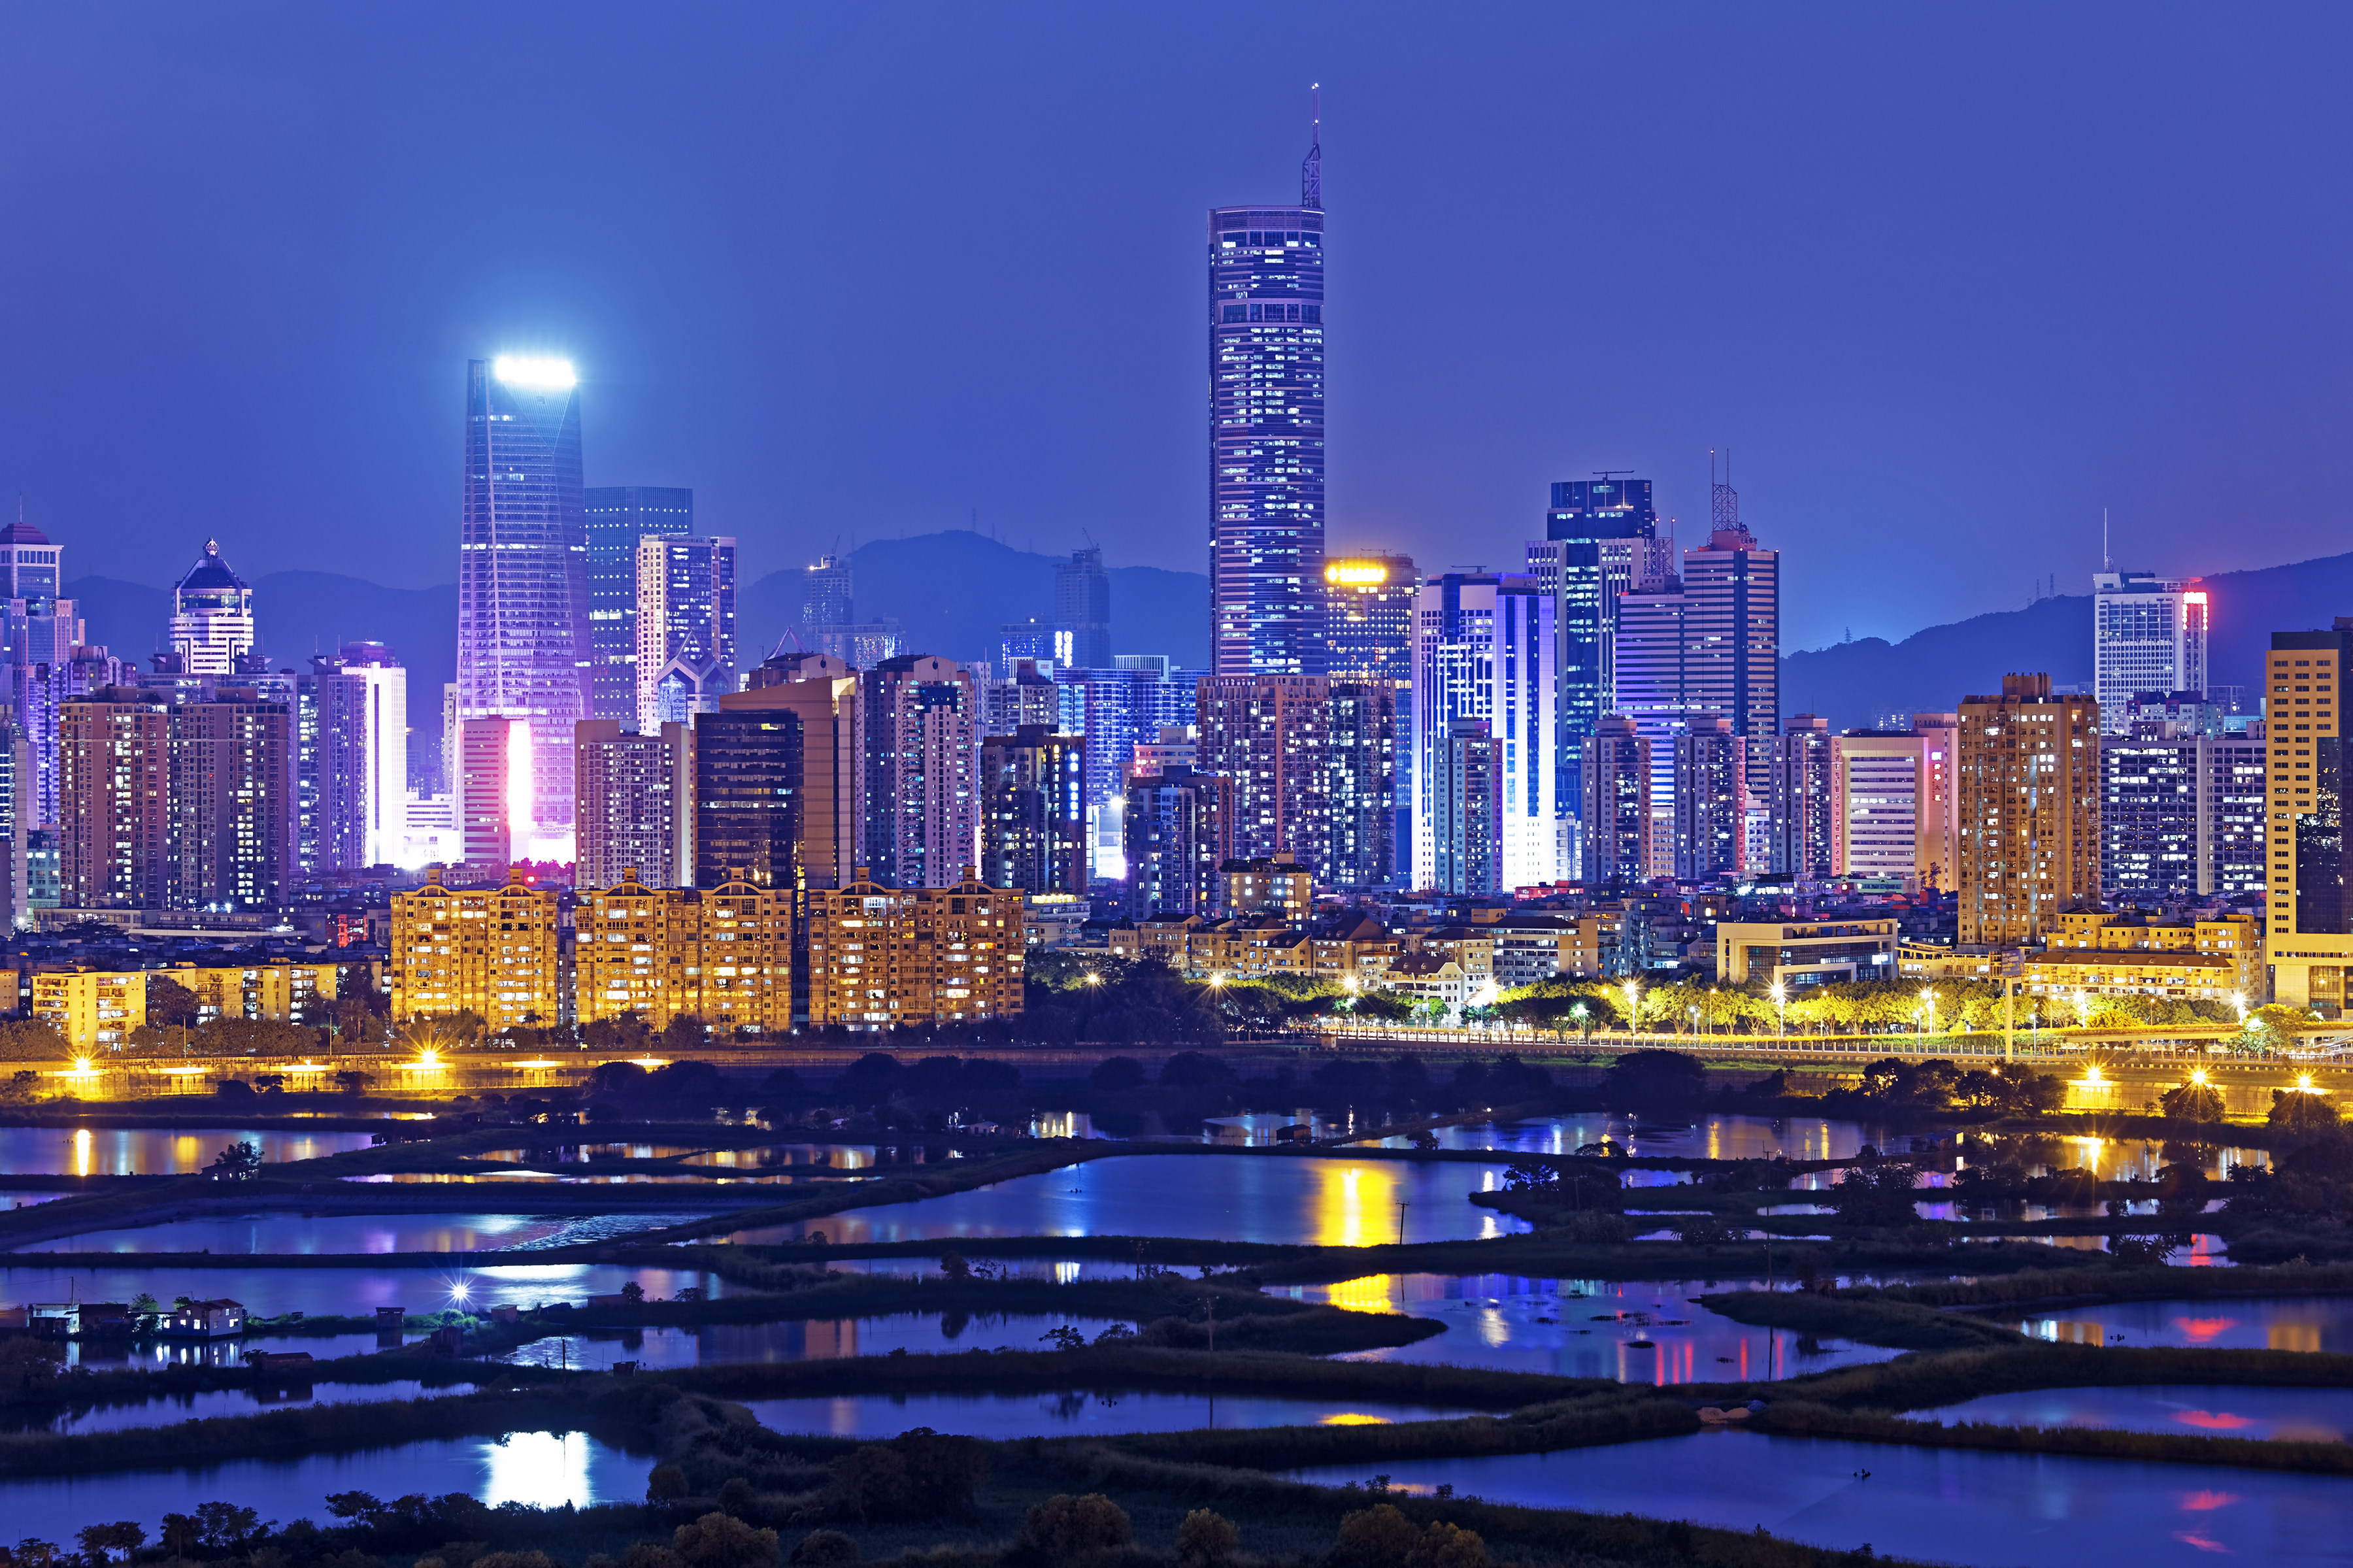 Shenzhen, the richest city in southern Guangdong province, is widely recognised as China’s Silicon Valley. Photo: Shutterstock